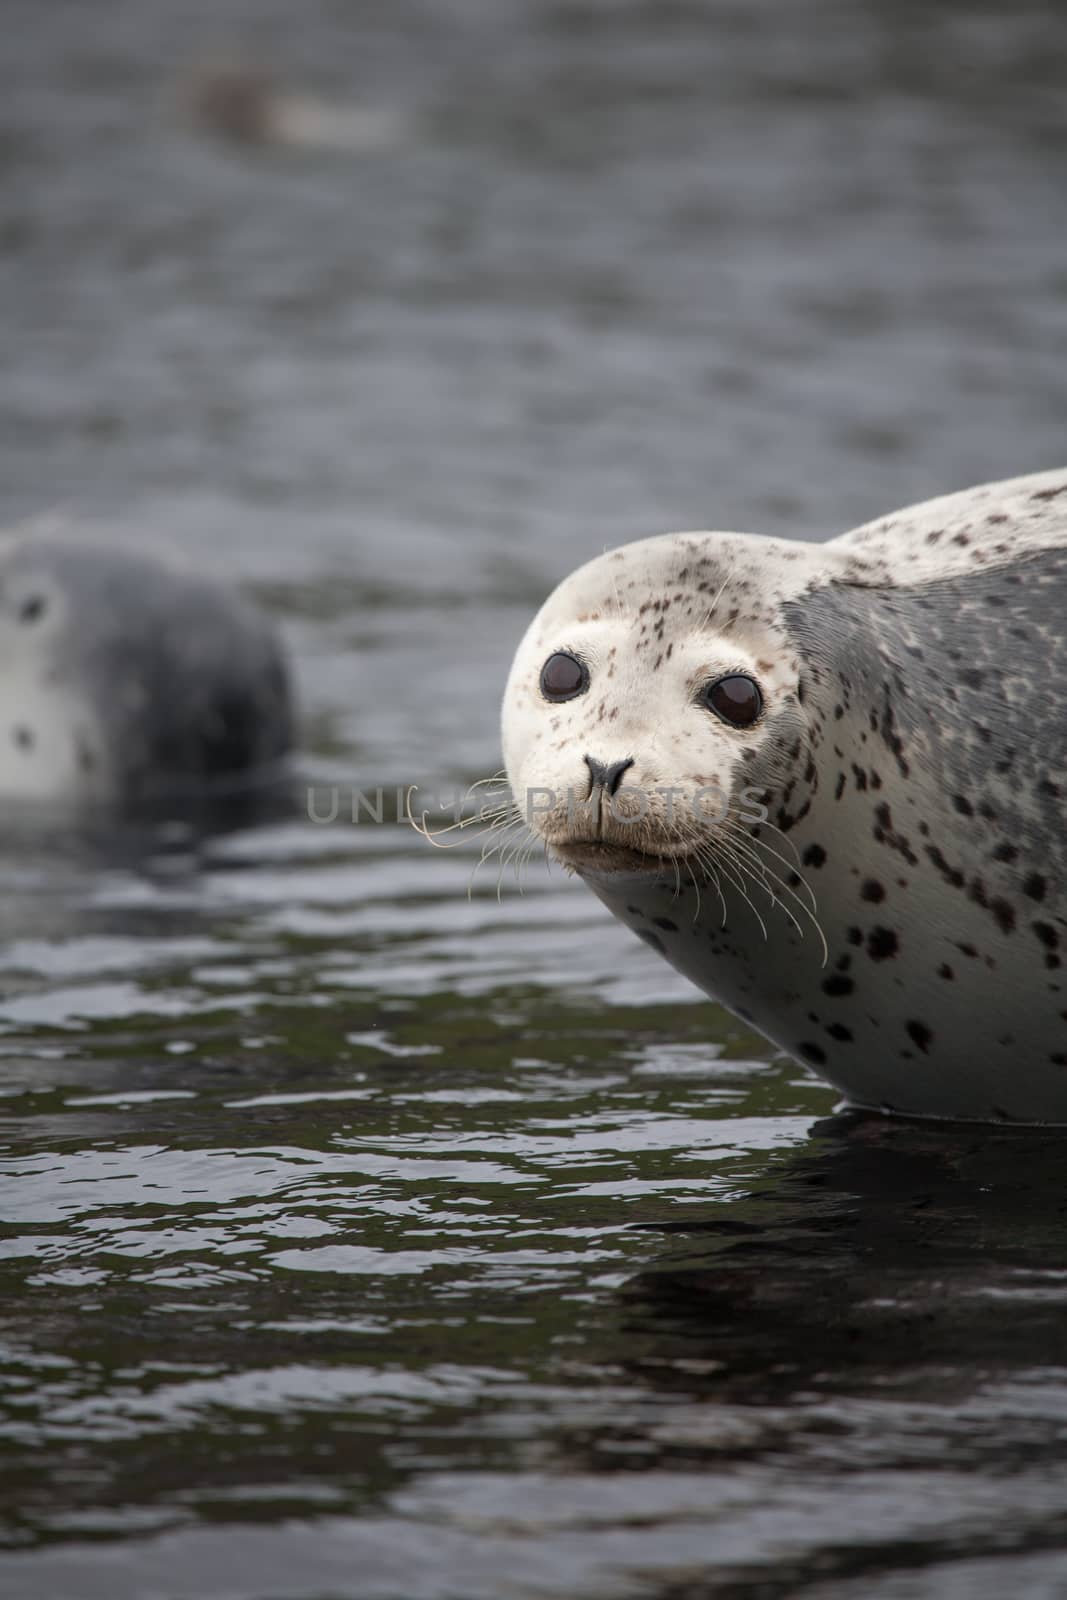 Phoca largha (Larga Seal, Spotted Seal) surface pictures by desant7474